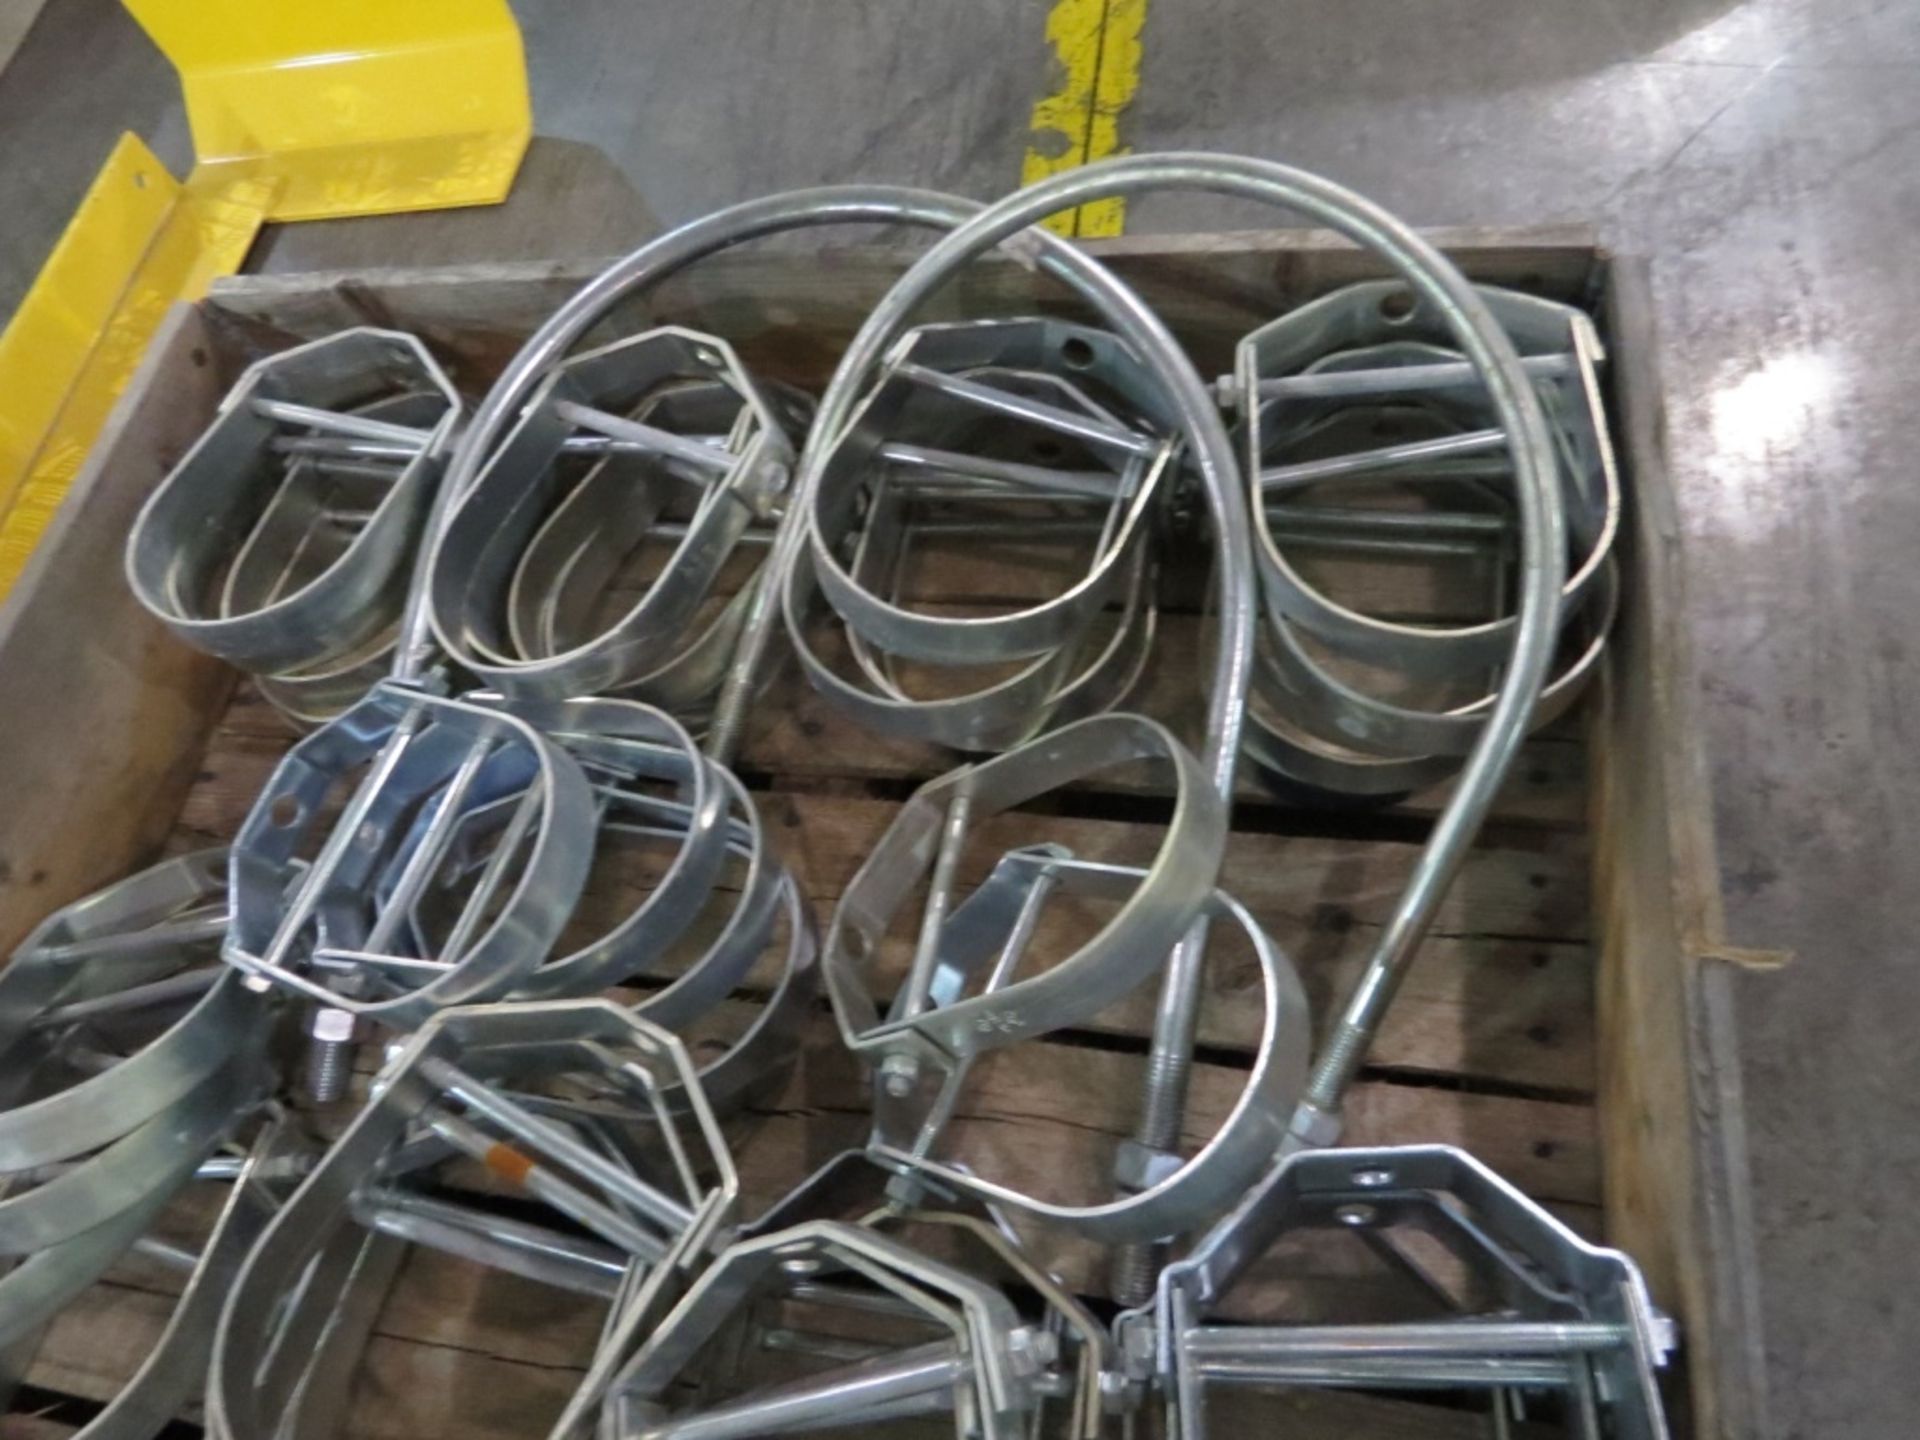 (approx qty - 65) 7" Clevis Hangers- ***Located in Cleveland, TN*** MFR - Unknown 7" - Image 4 of 4